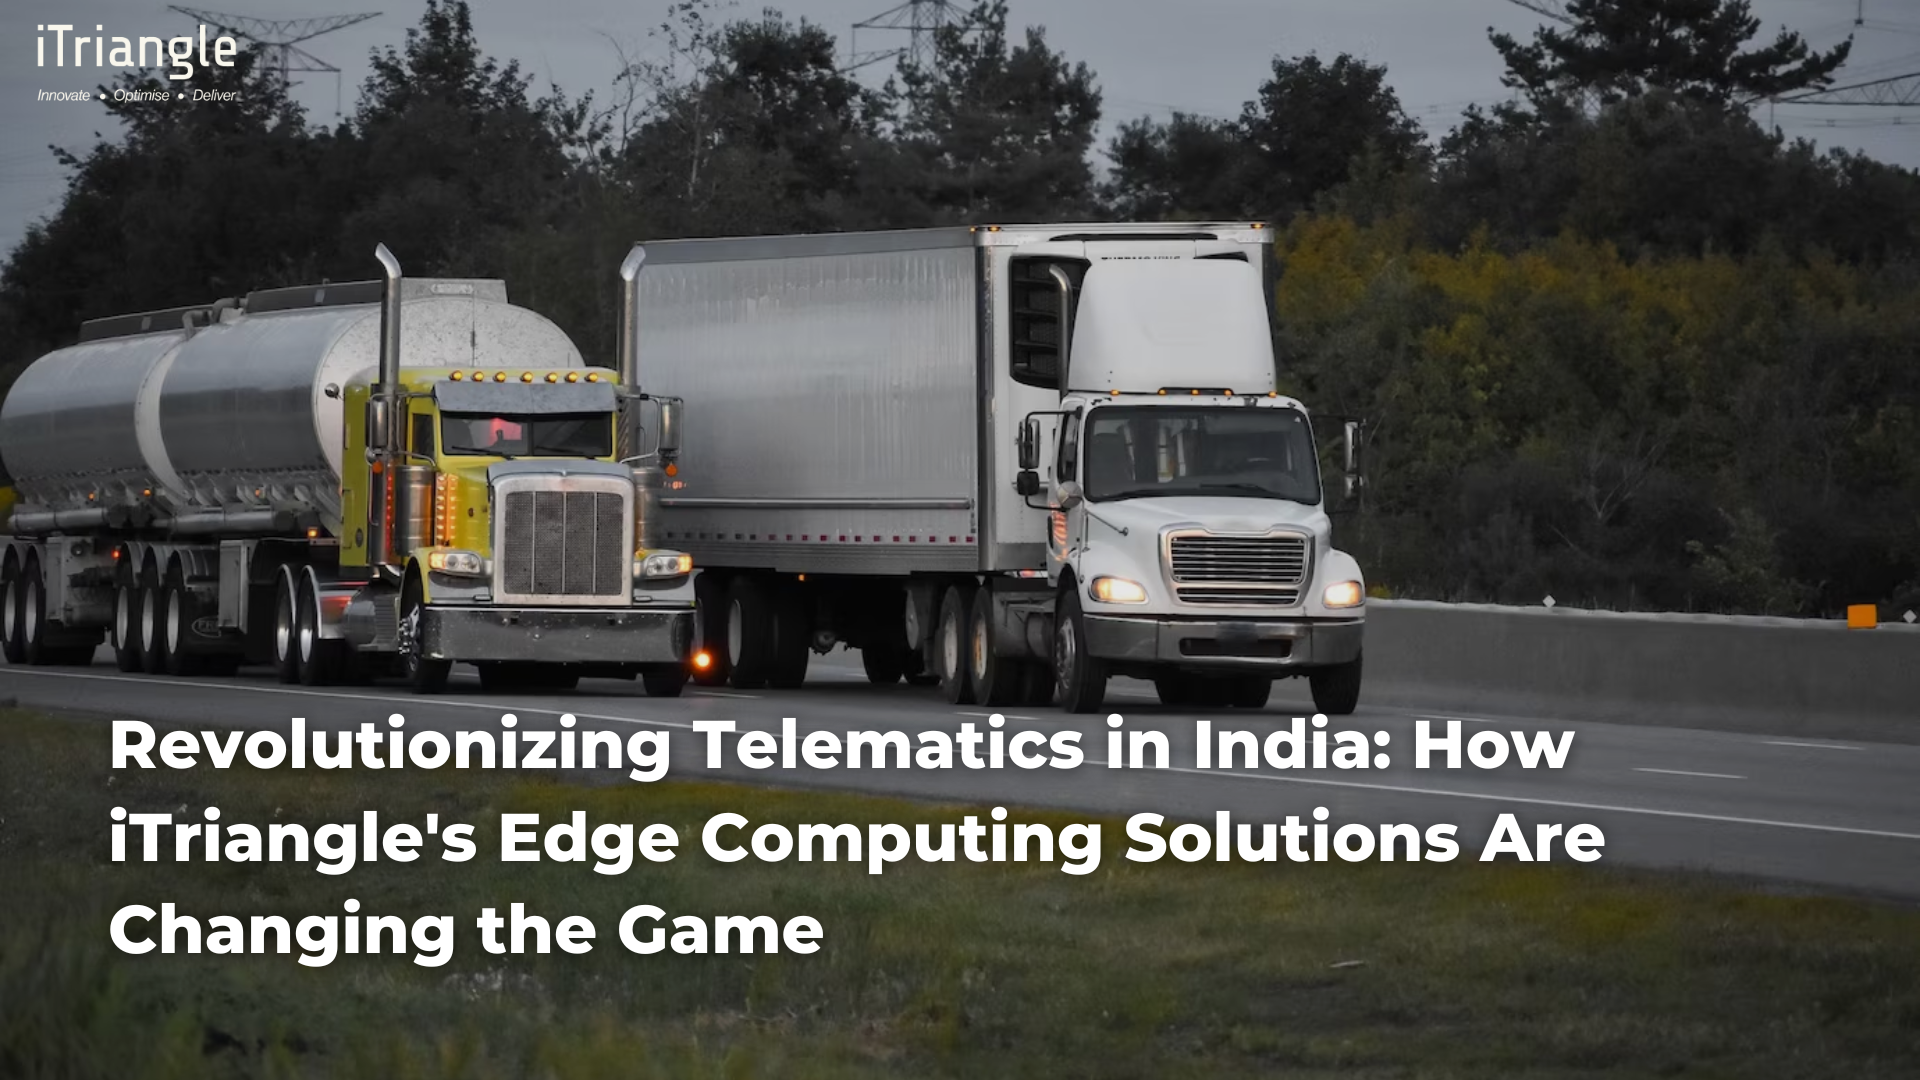 Revolutionizing Telematics in India: How iTriangle’s Edge Computing Solutions Are Changing the Game